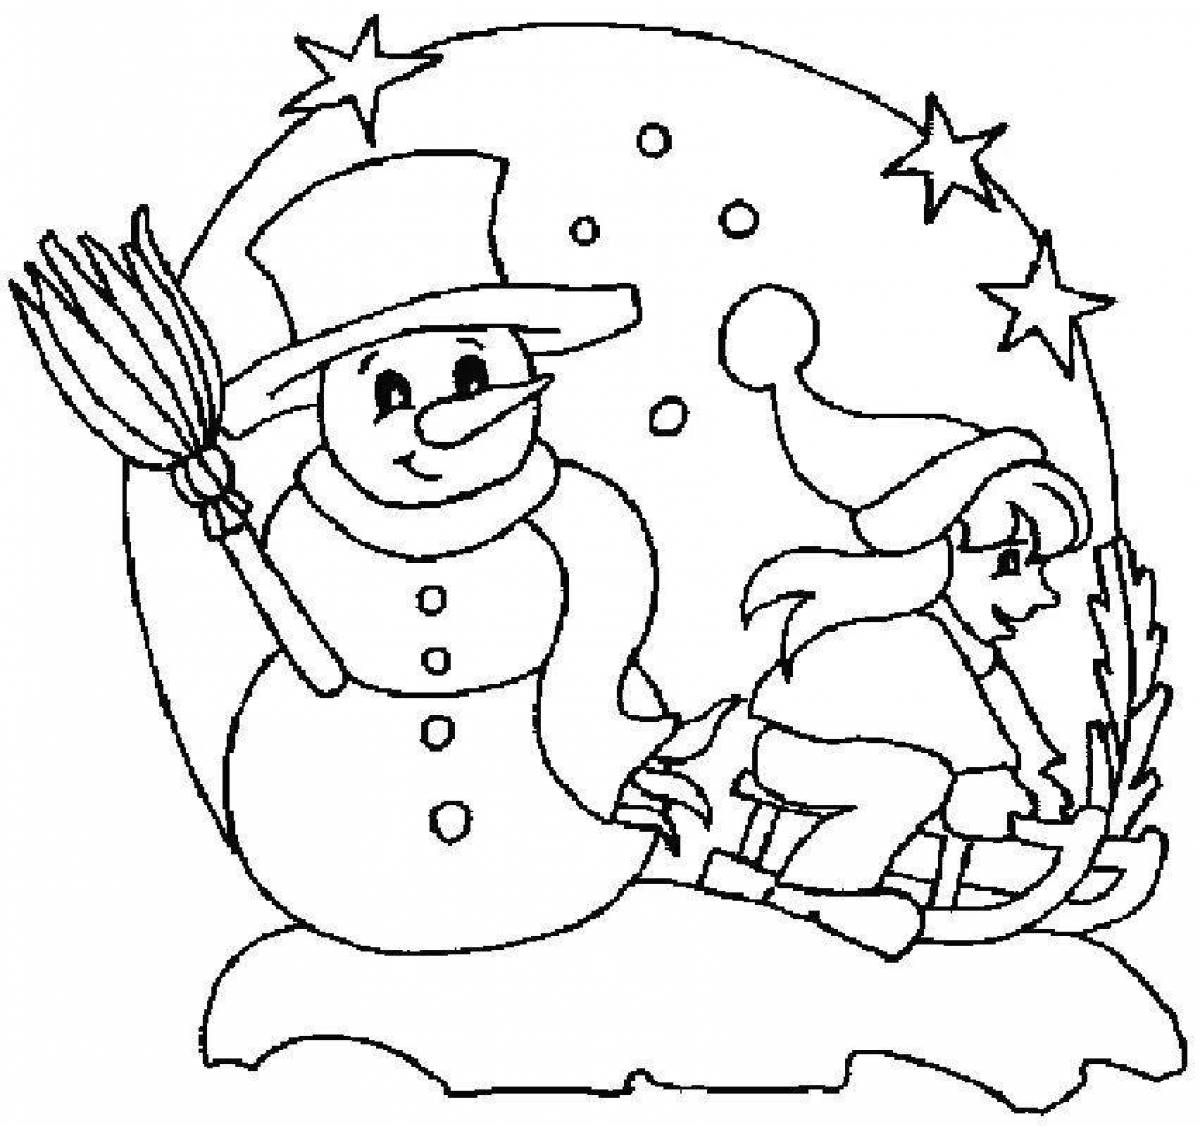 Gross tree and snowman coloring page